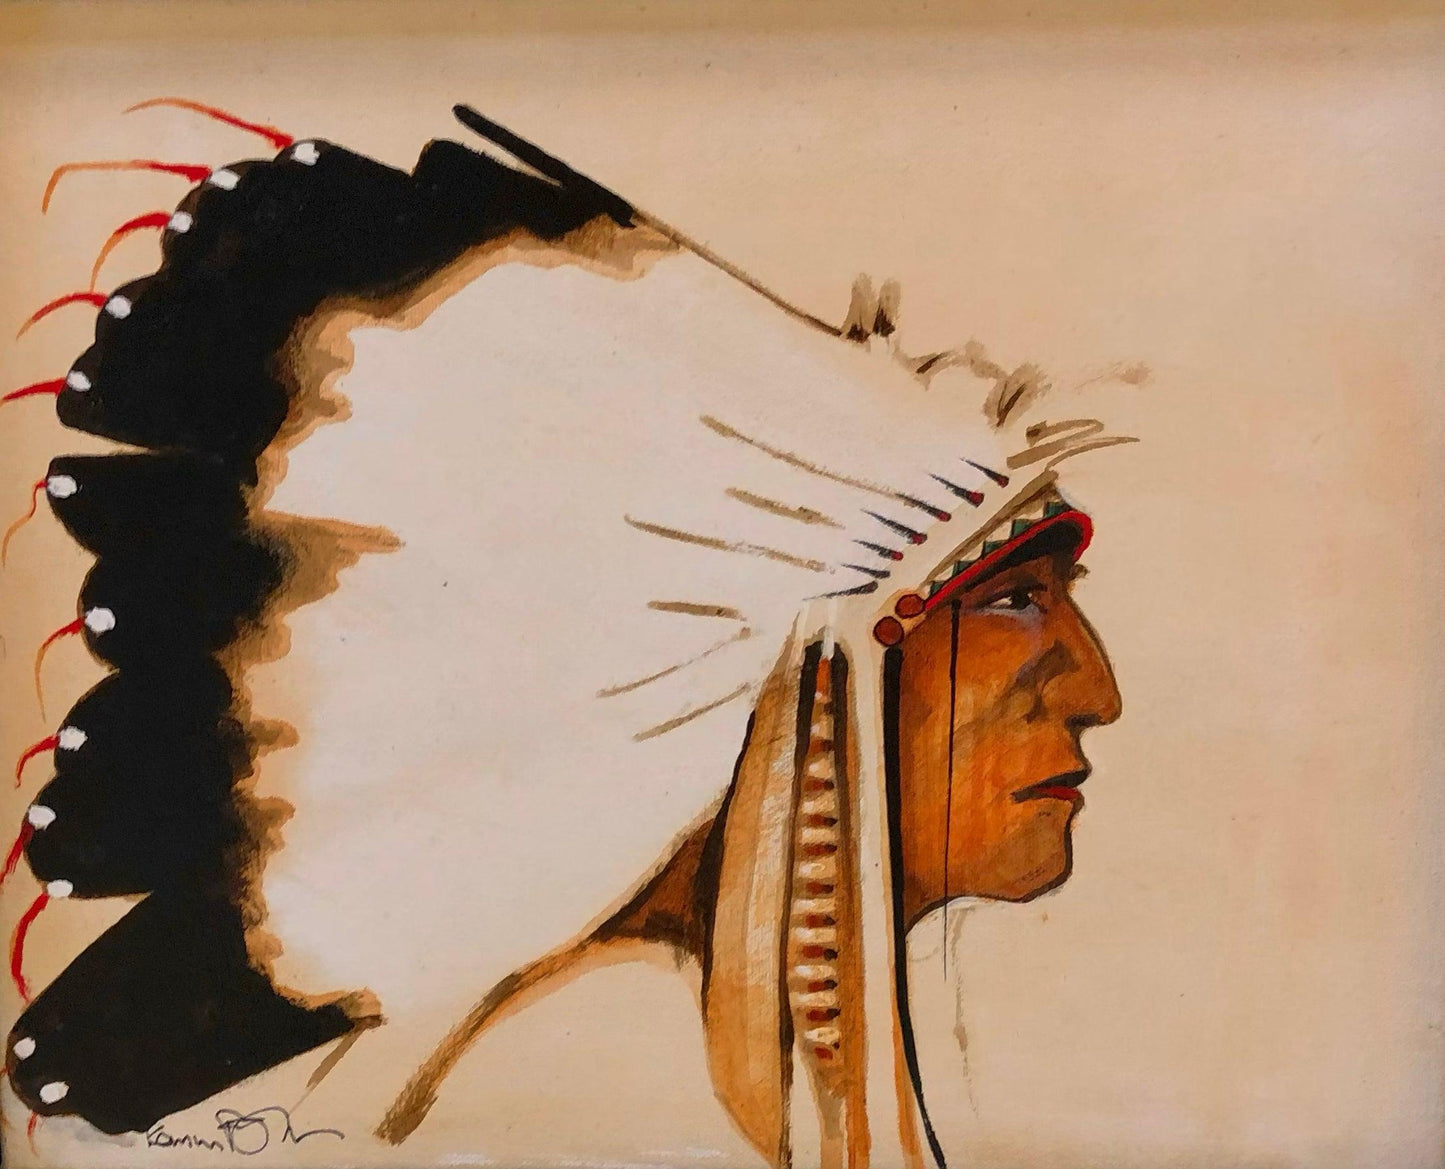 Eagle Feather Headdress-Painting-Kevin Red Star-Sorrel Sky Gallery